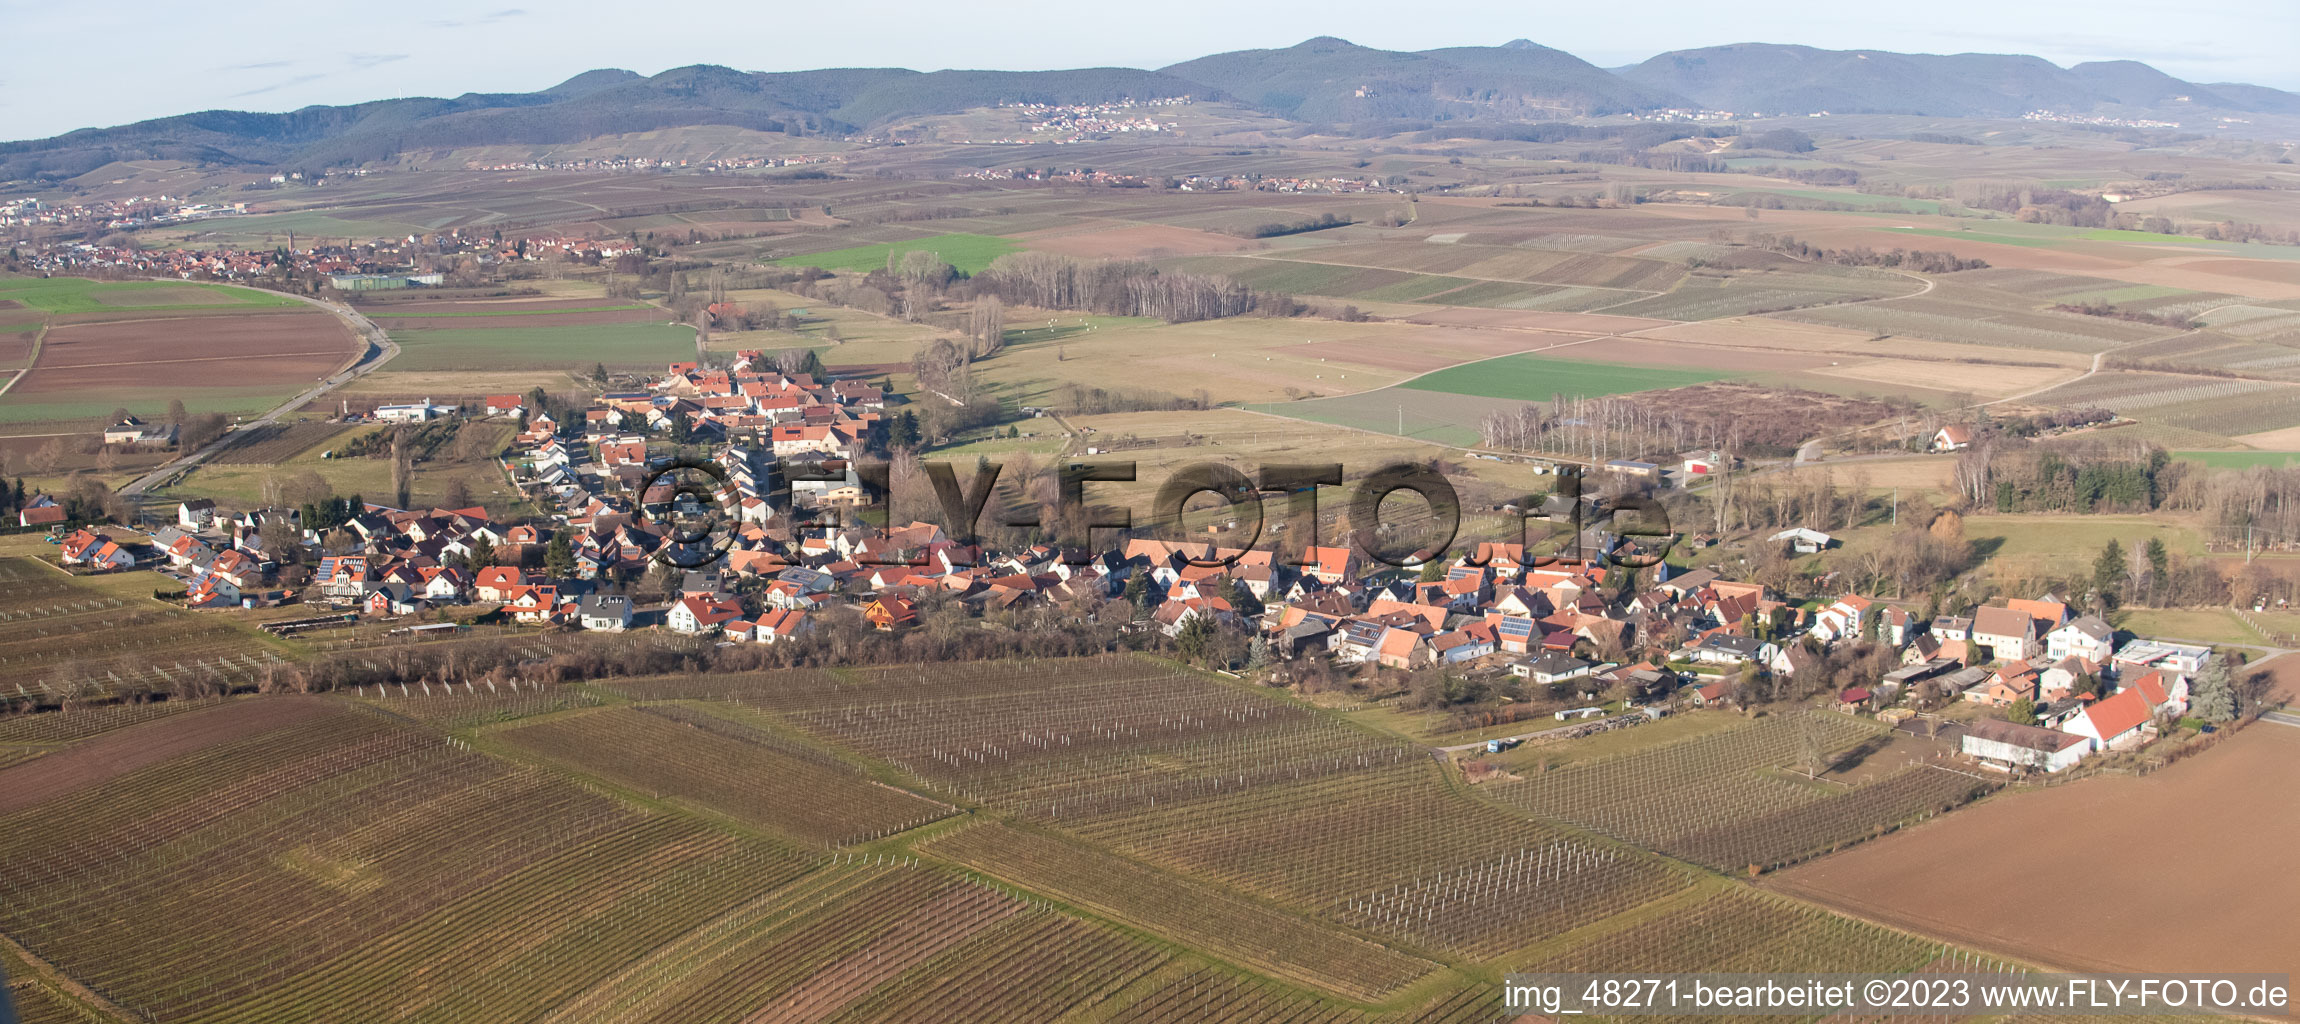 Oberhausen in the state Rhineland-Palatinate, Germany out of the air